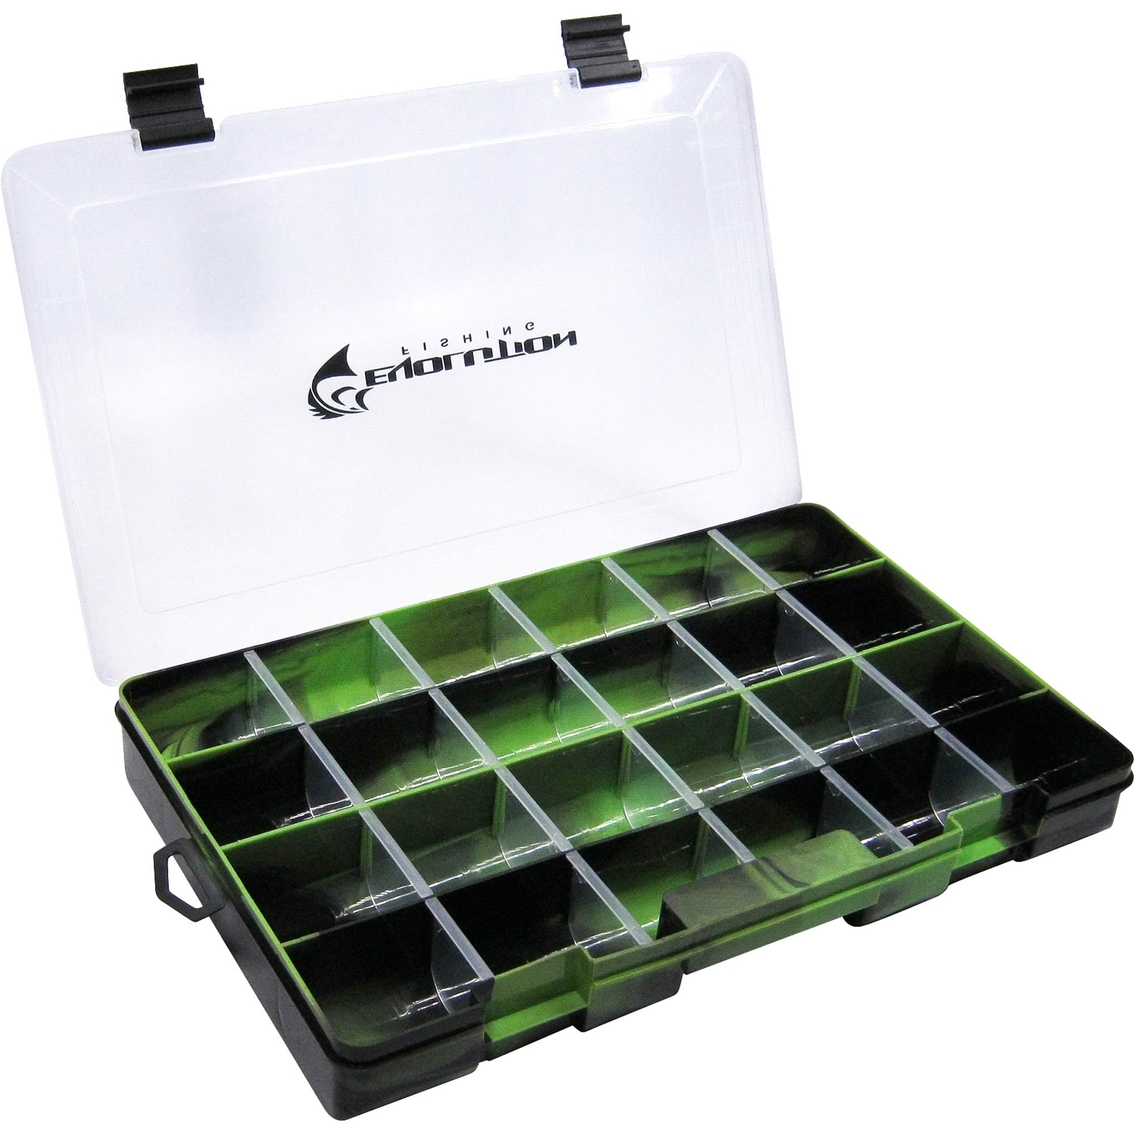 Drift Series 3700 Tackle Tray, Fishing Accessories, Sports & Outdoors